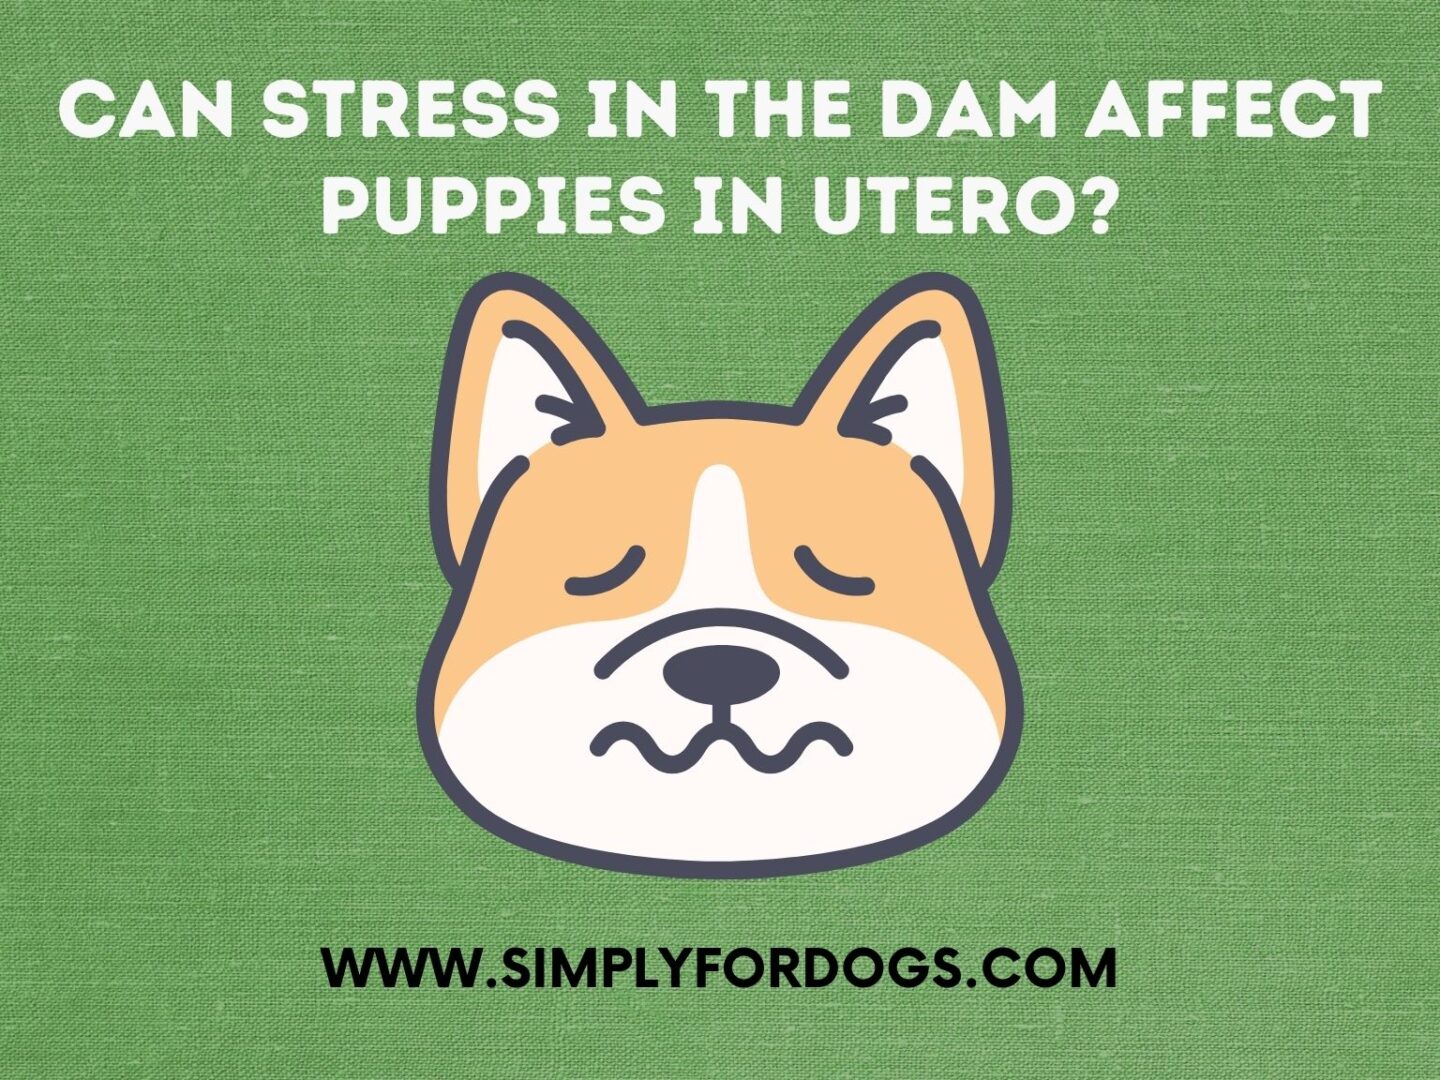 Can Stress in the Dam Affect Puppies in Utero_